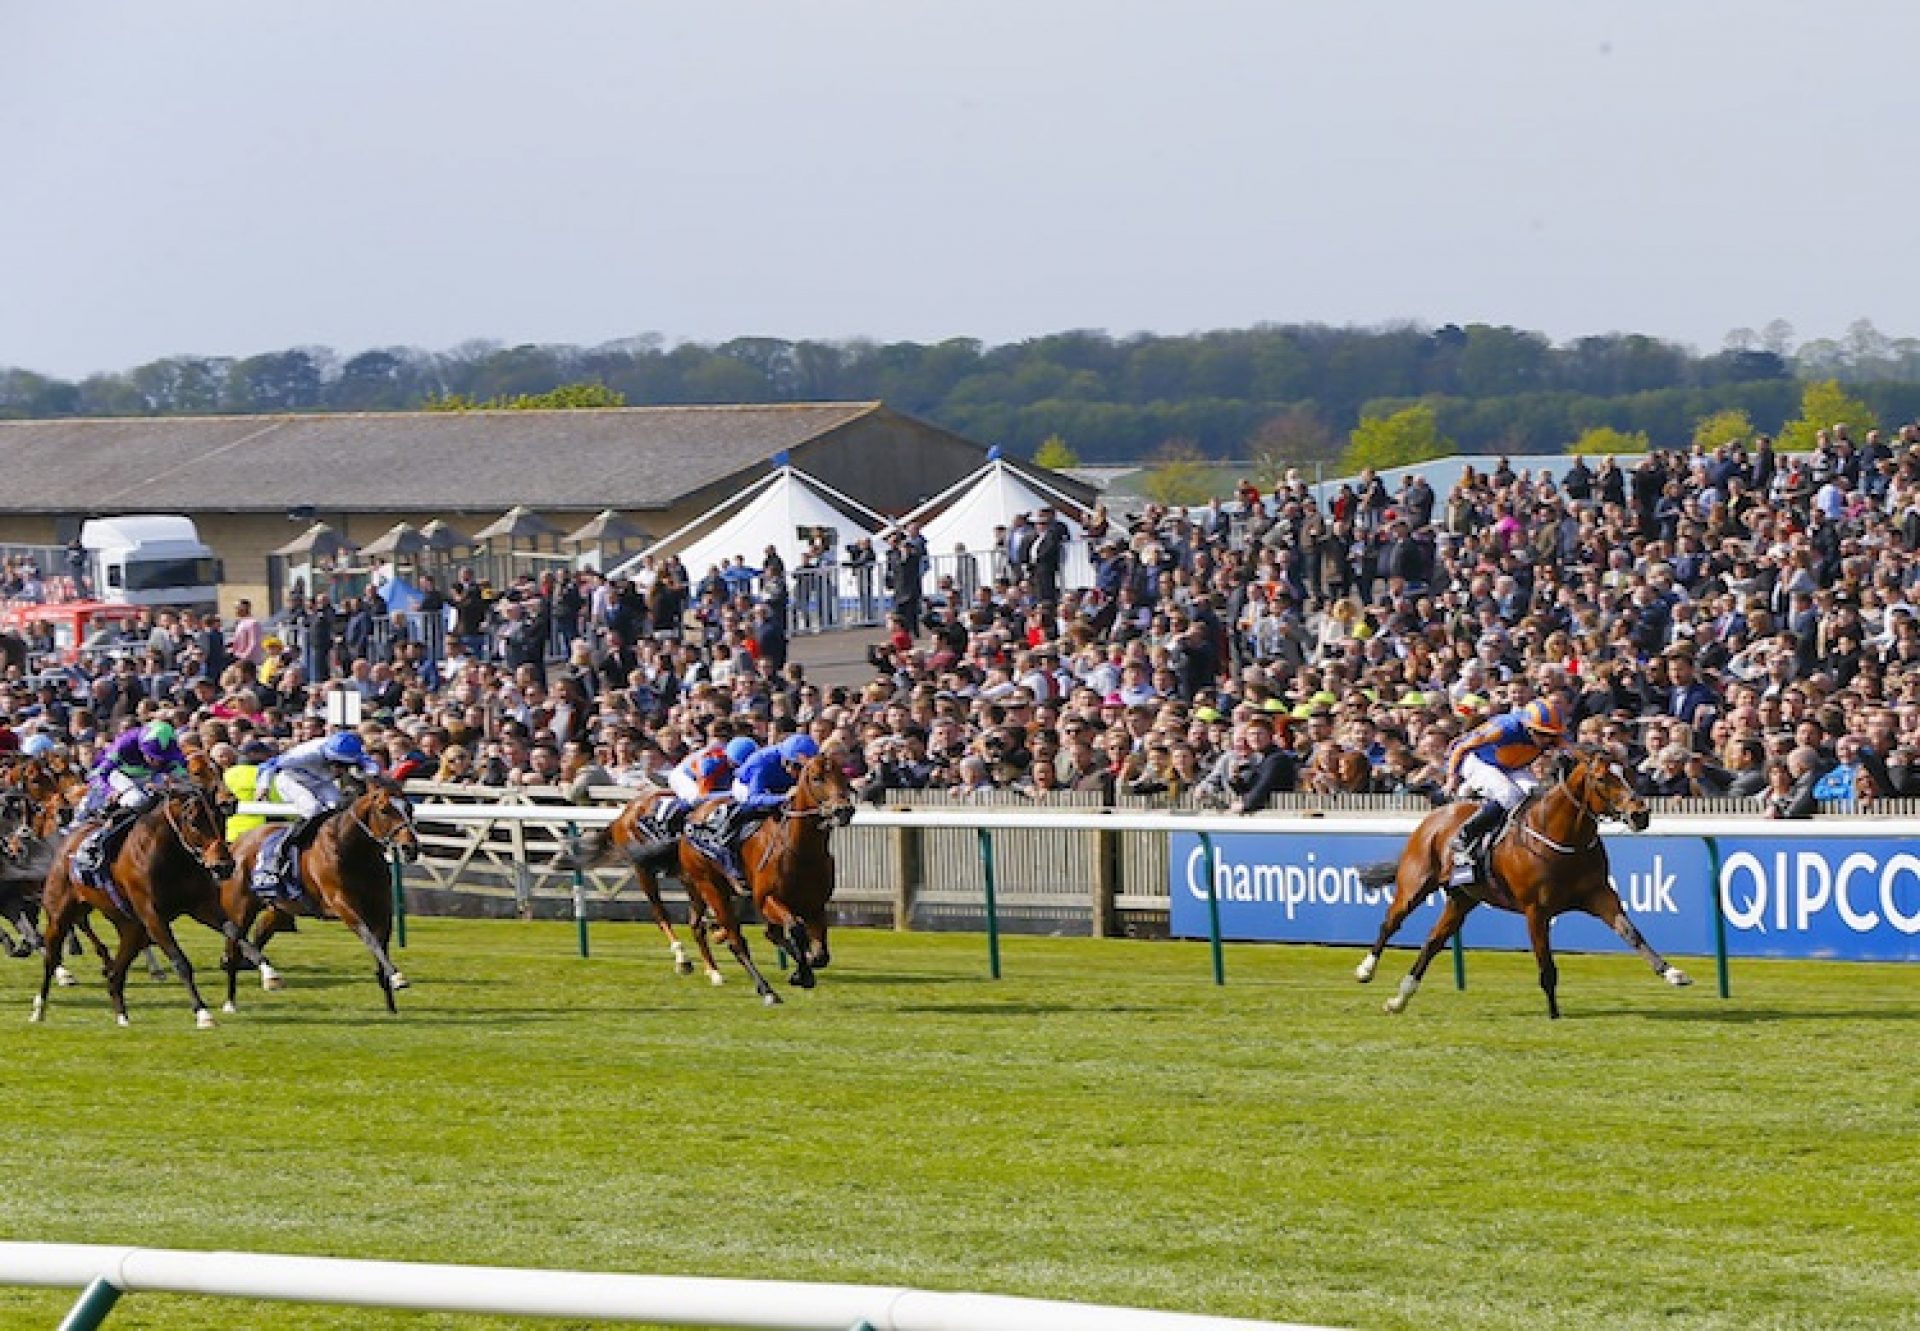 Gleneagles (Galileo) winning the G1 2000 Guineas at Newmarket